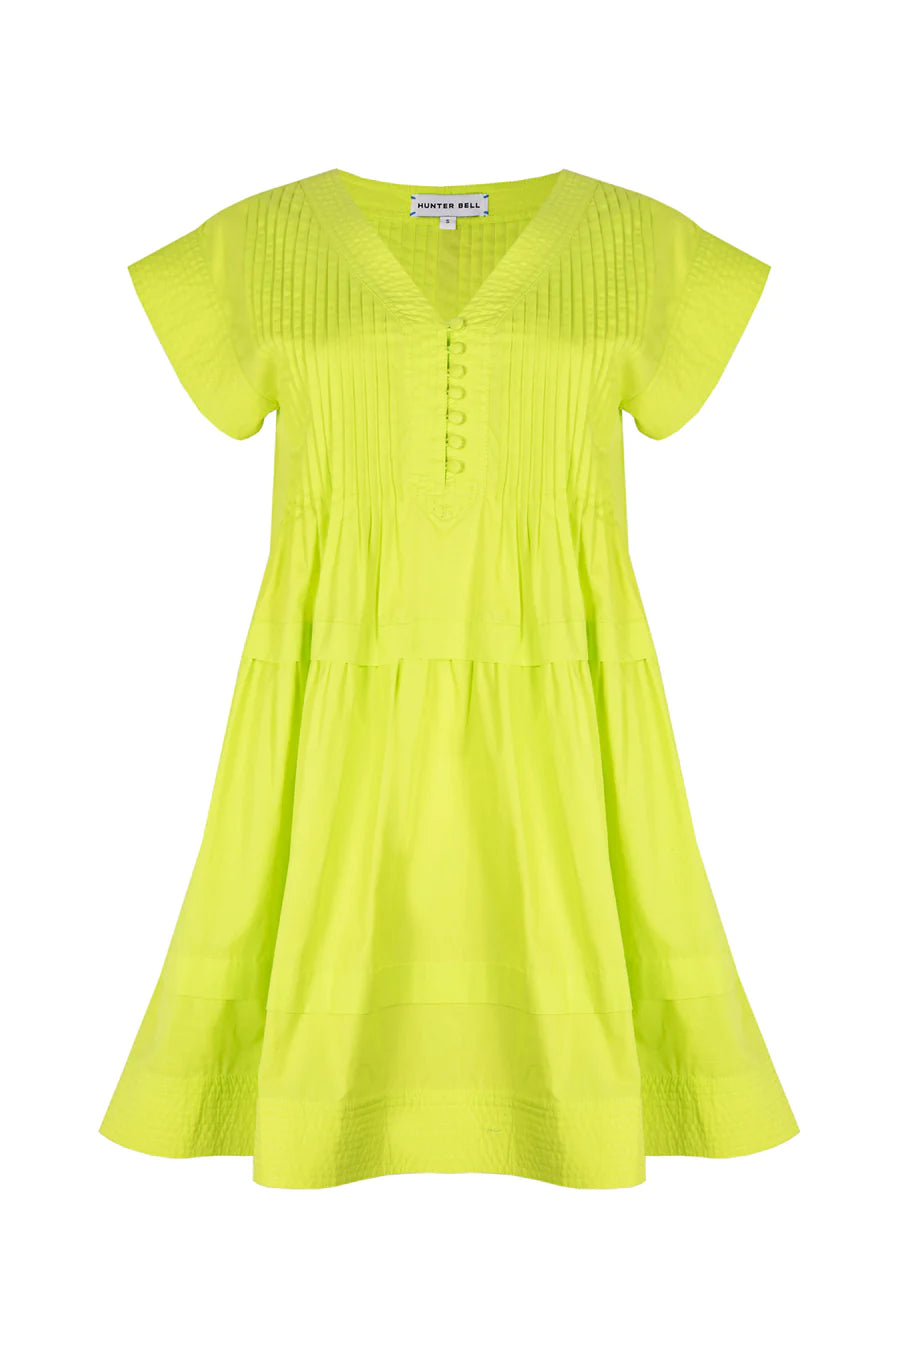 Parker Dress in Lime by Hunter Bell